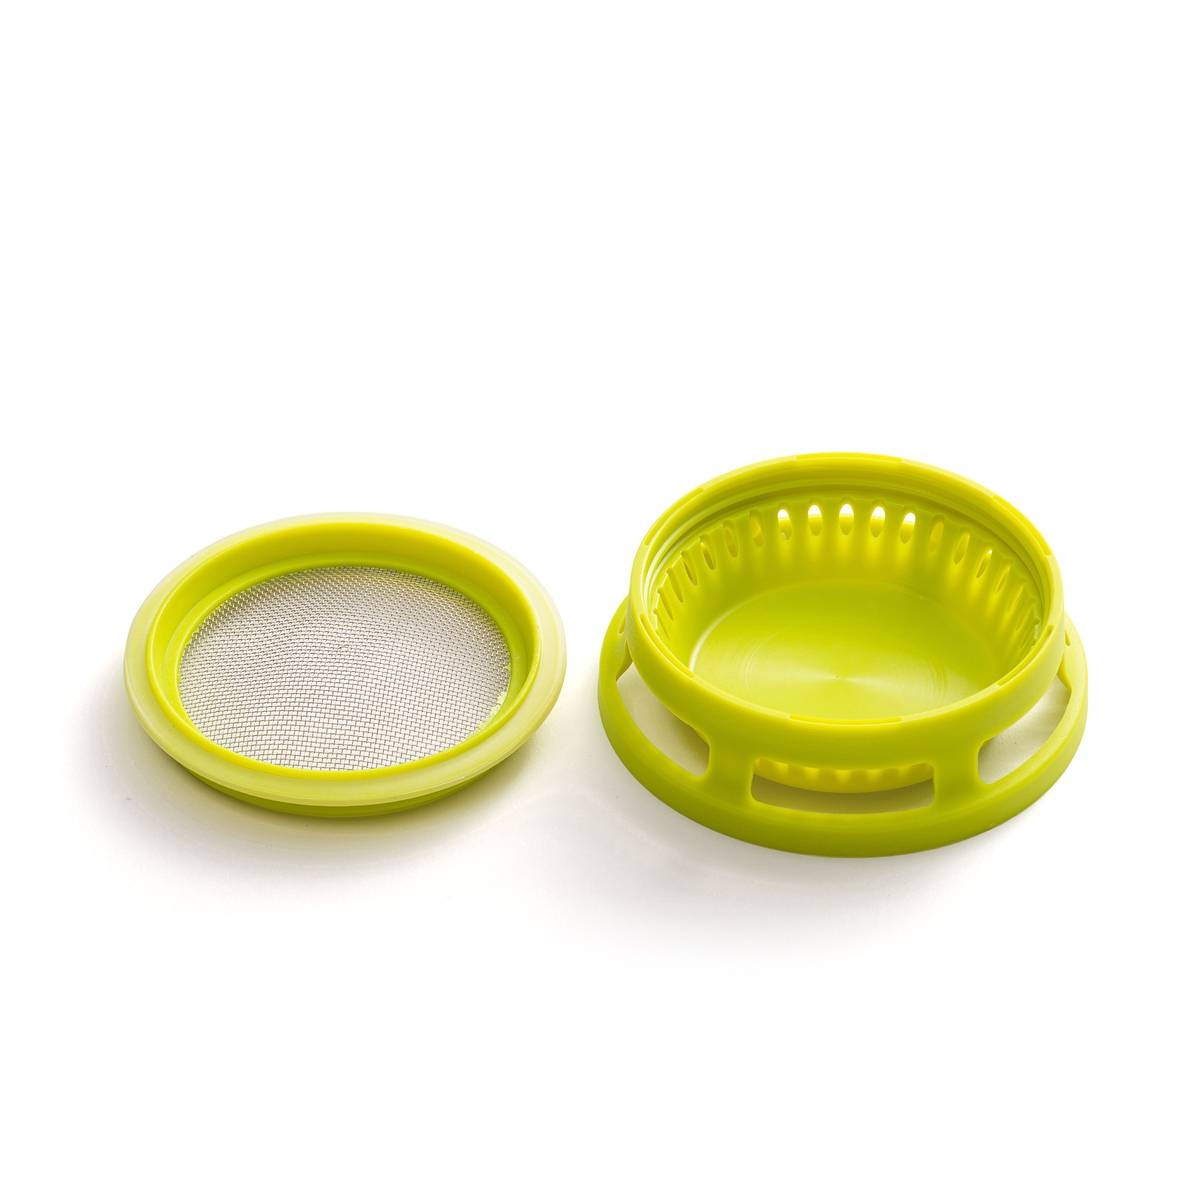 Jarware Seed Sprouter- Jar Attachment